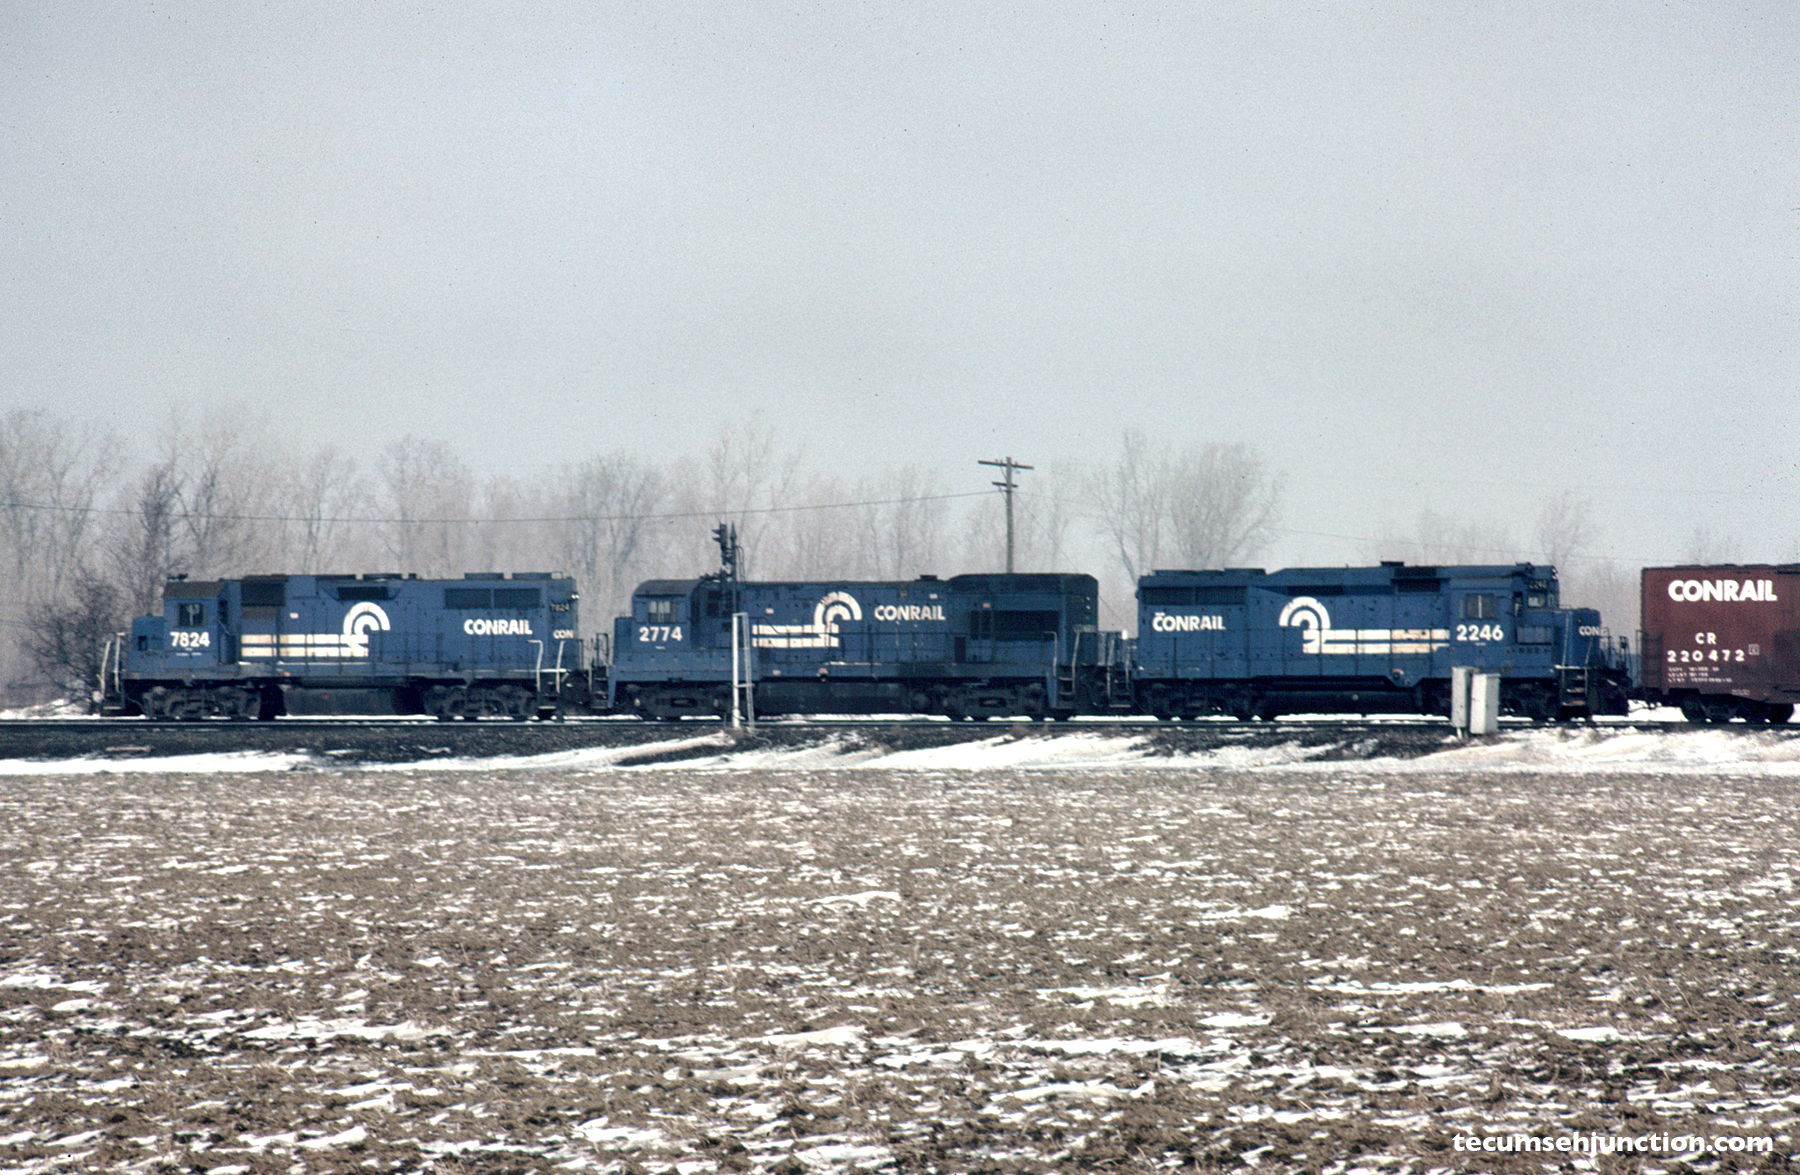 Conrail 7824, 2774 and 2246 lead a train near Stanley Tower on 10 March 1984.